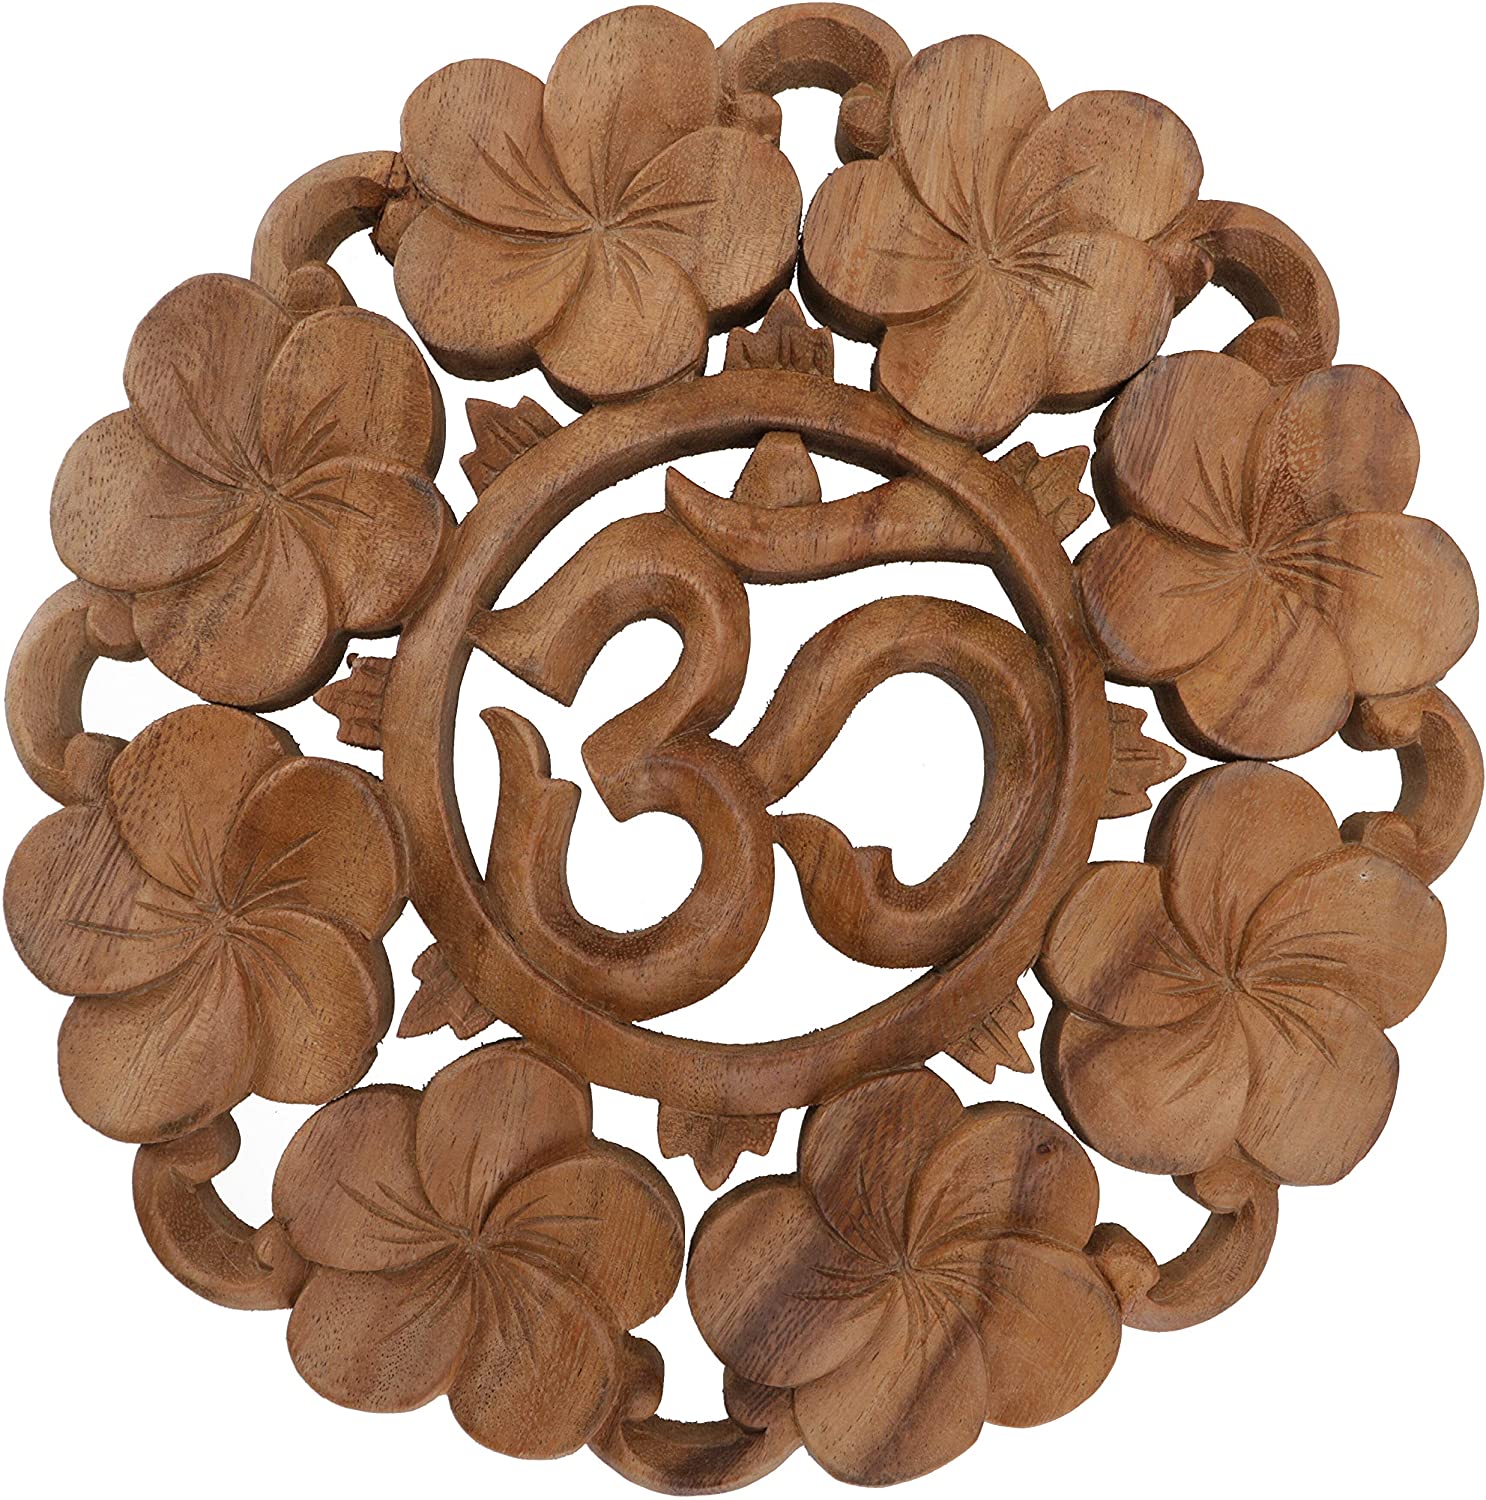 GURU SHOP Carved Wall Picture Decorative Wall Relief OM & Flowers Brown 28 x 28 x 2 cm Masks & Wall Decoration